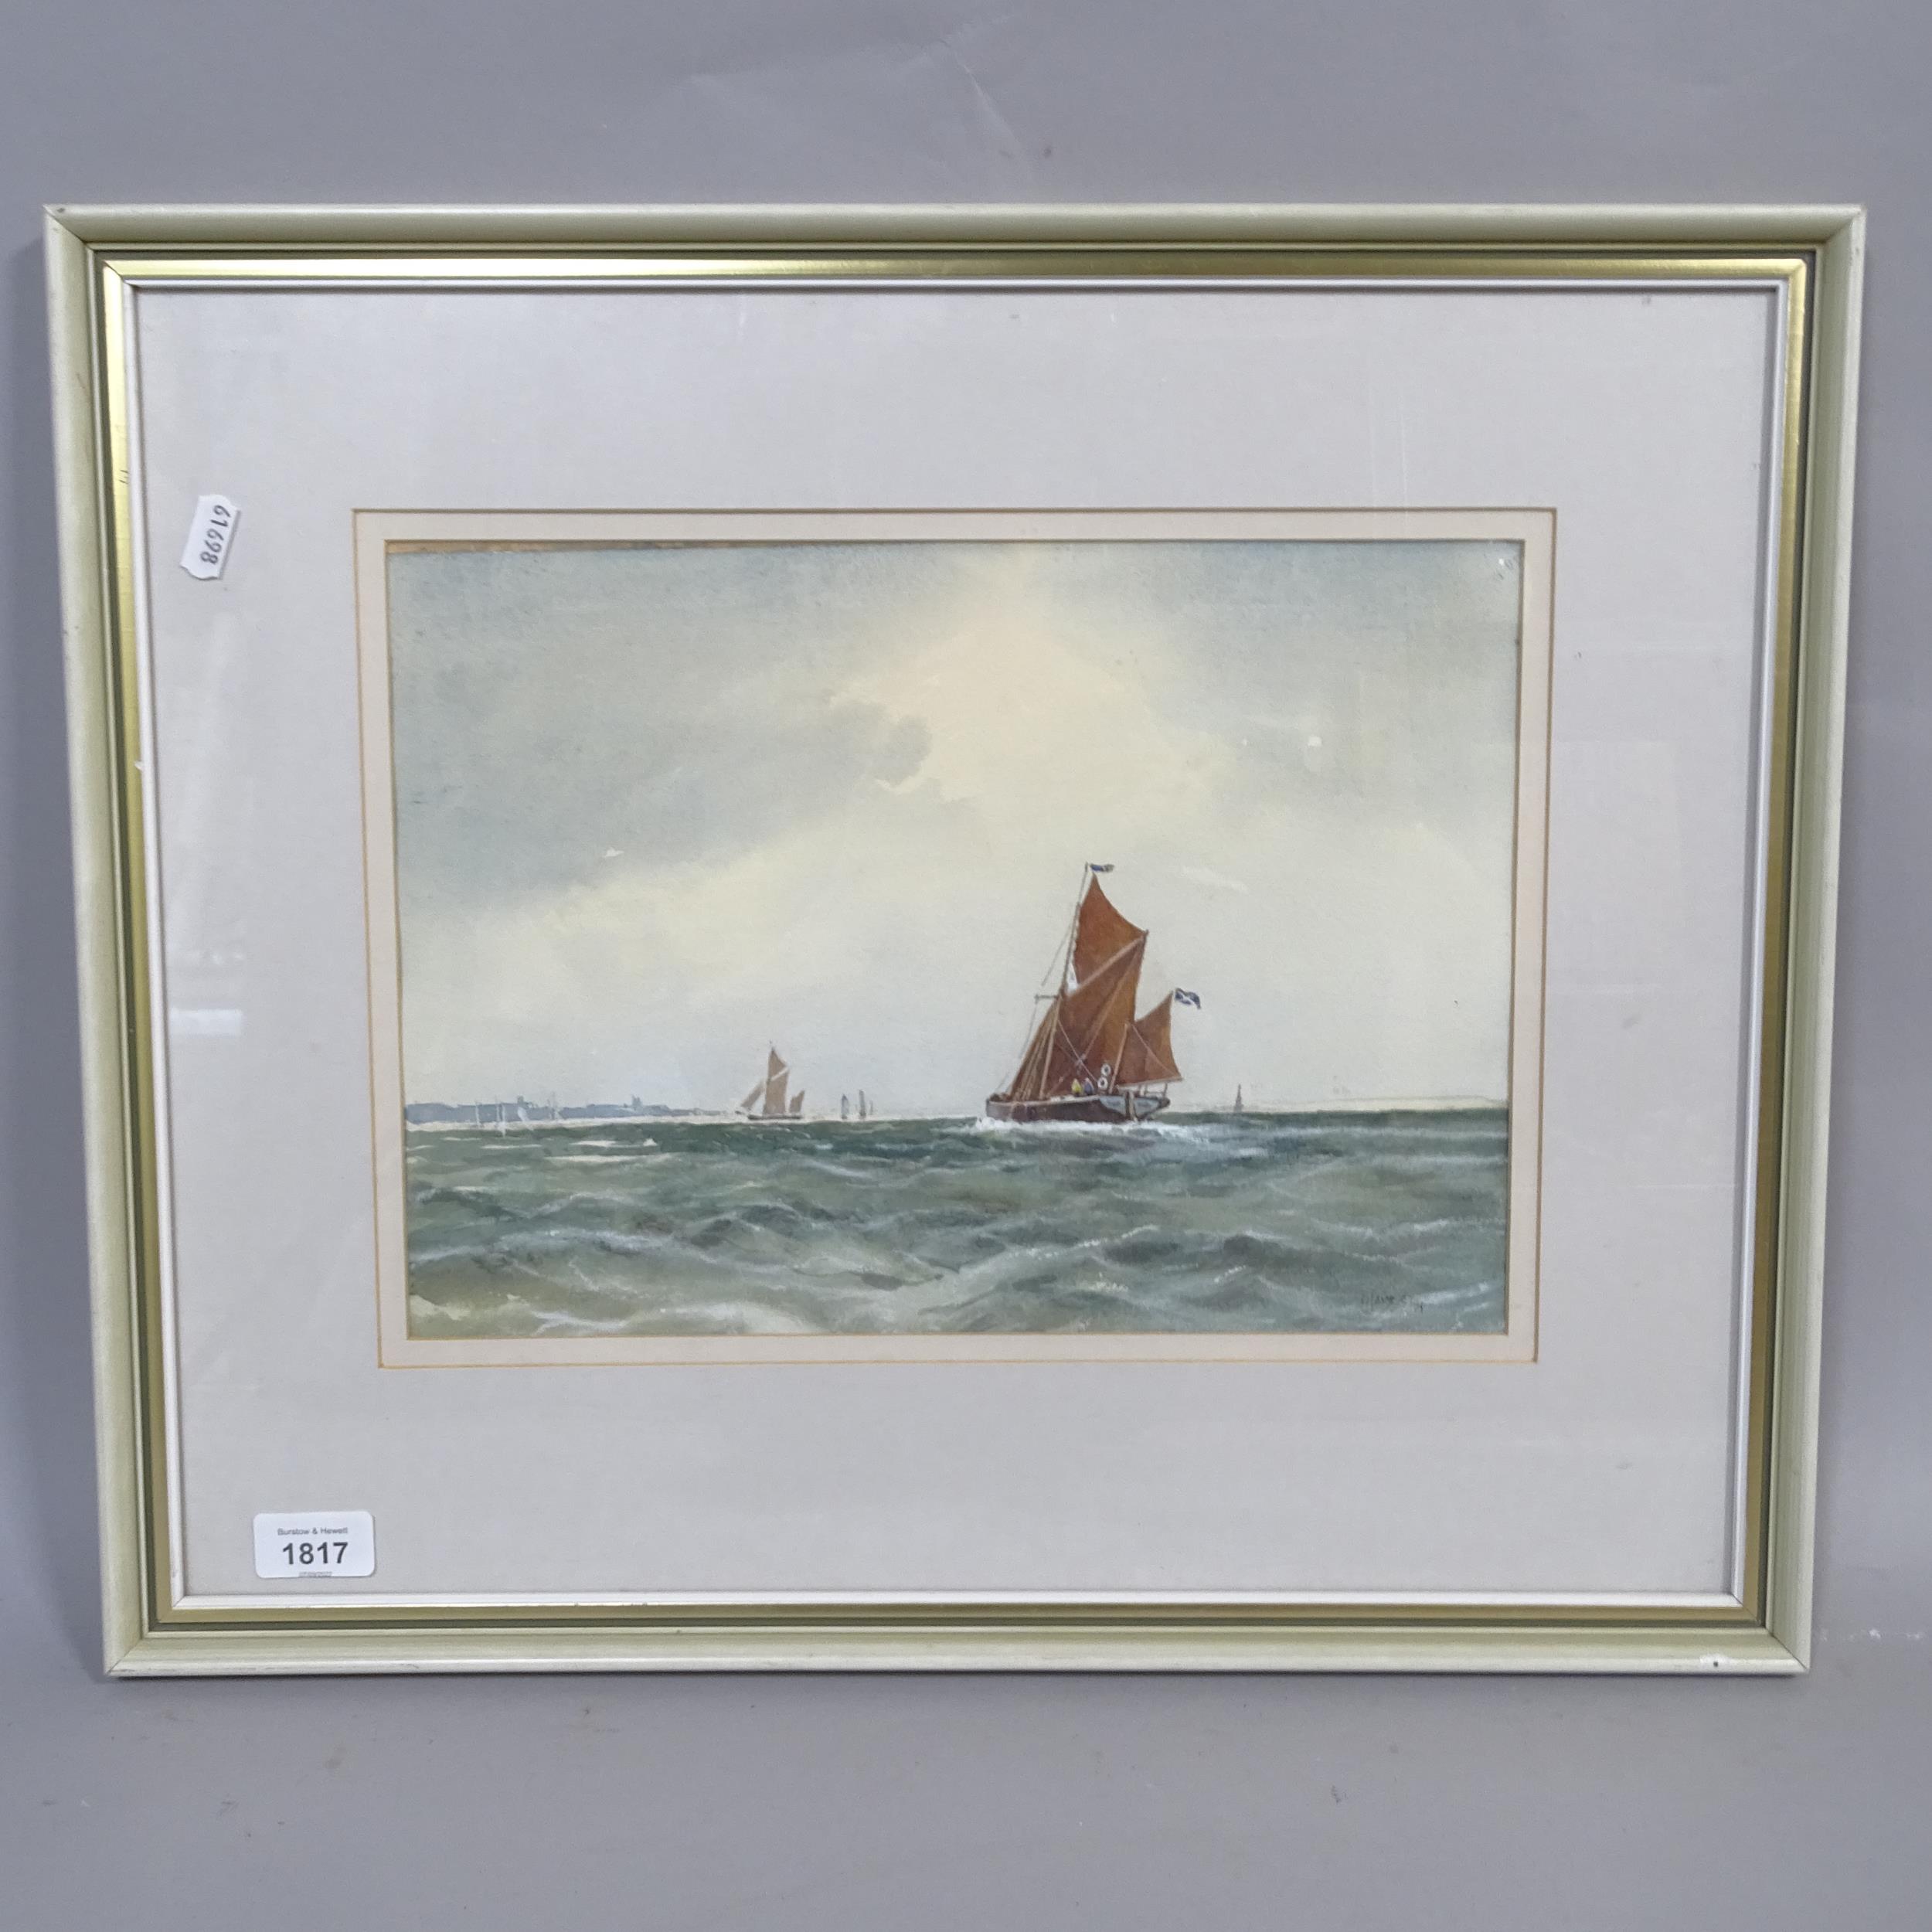 Franks James, watercolour, "The May" in a fresh westerly, off Harwich, with label verso, 45cm x 54cm